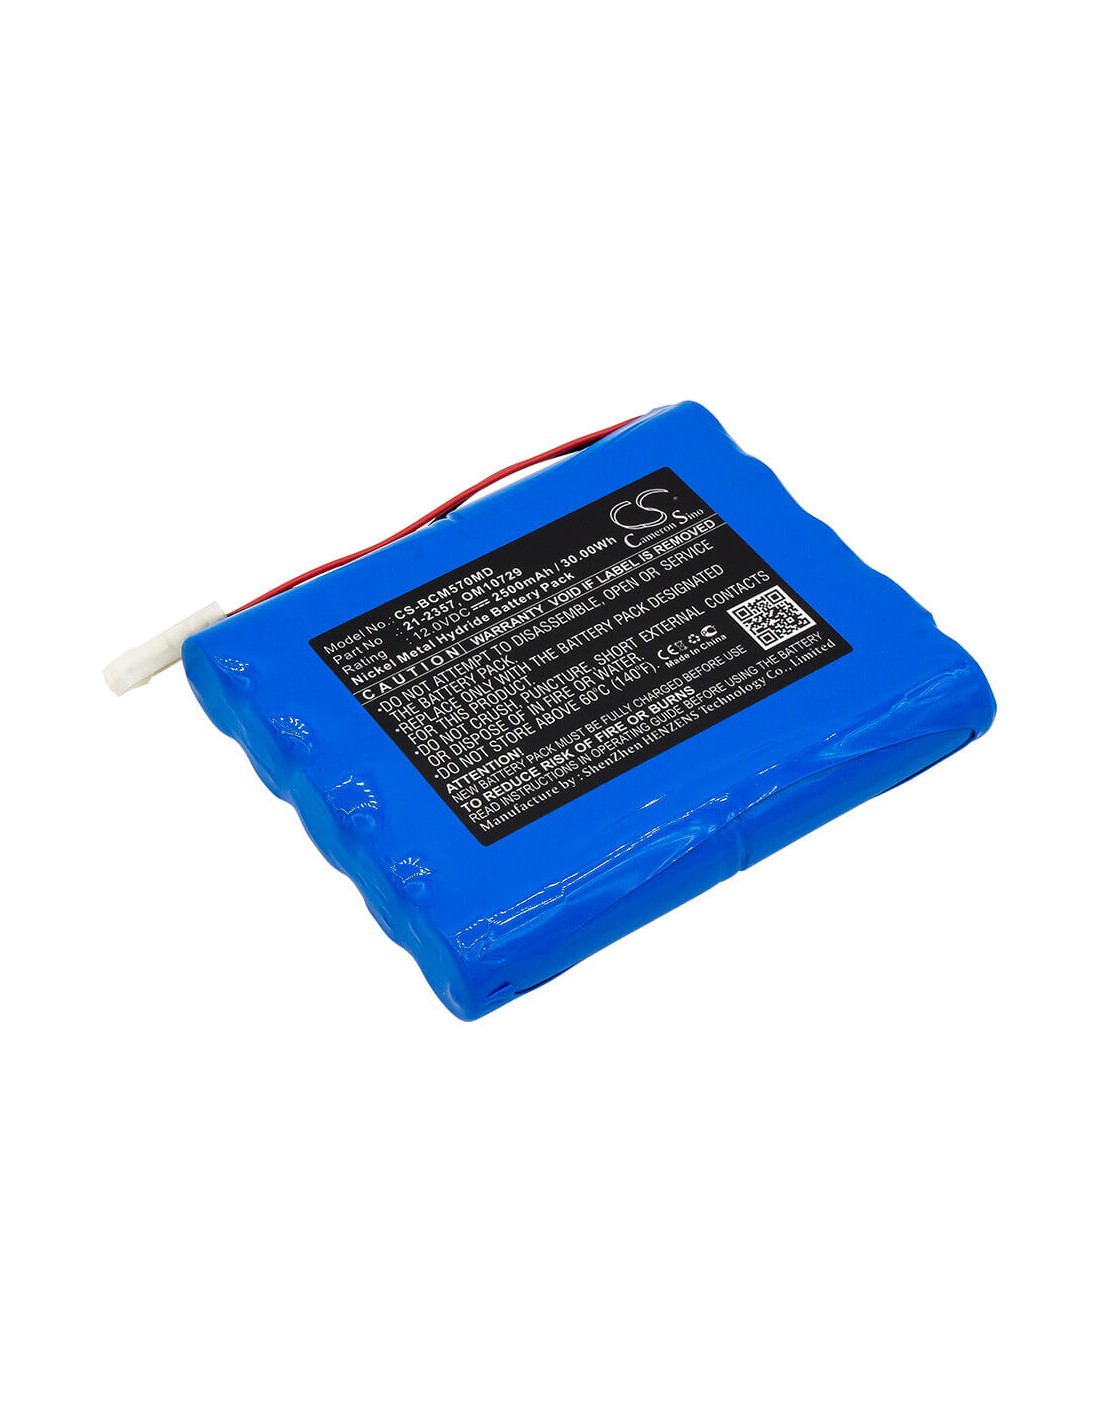 Battery for Bci, Cadd Tpn 5700 Infusion Pump, Tpn 5700 Infusion Pum 12V, 2500mAh - 30.00Wh